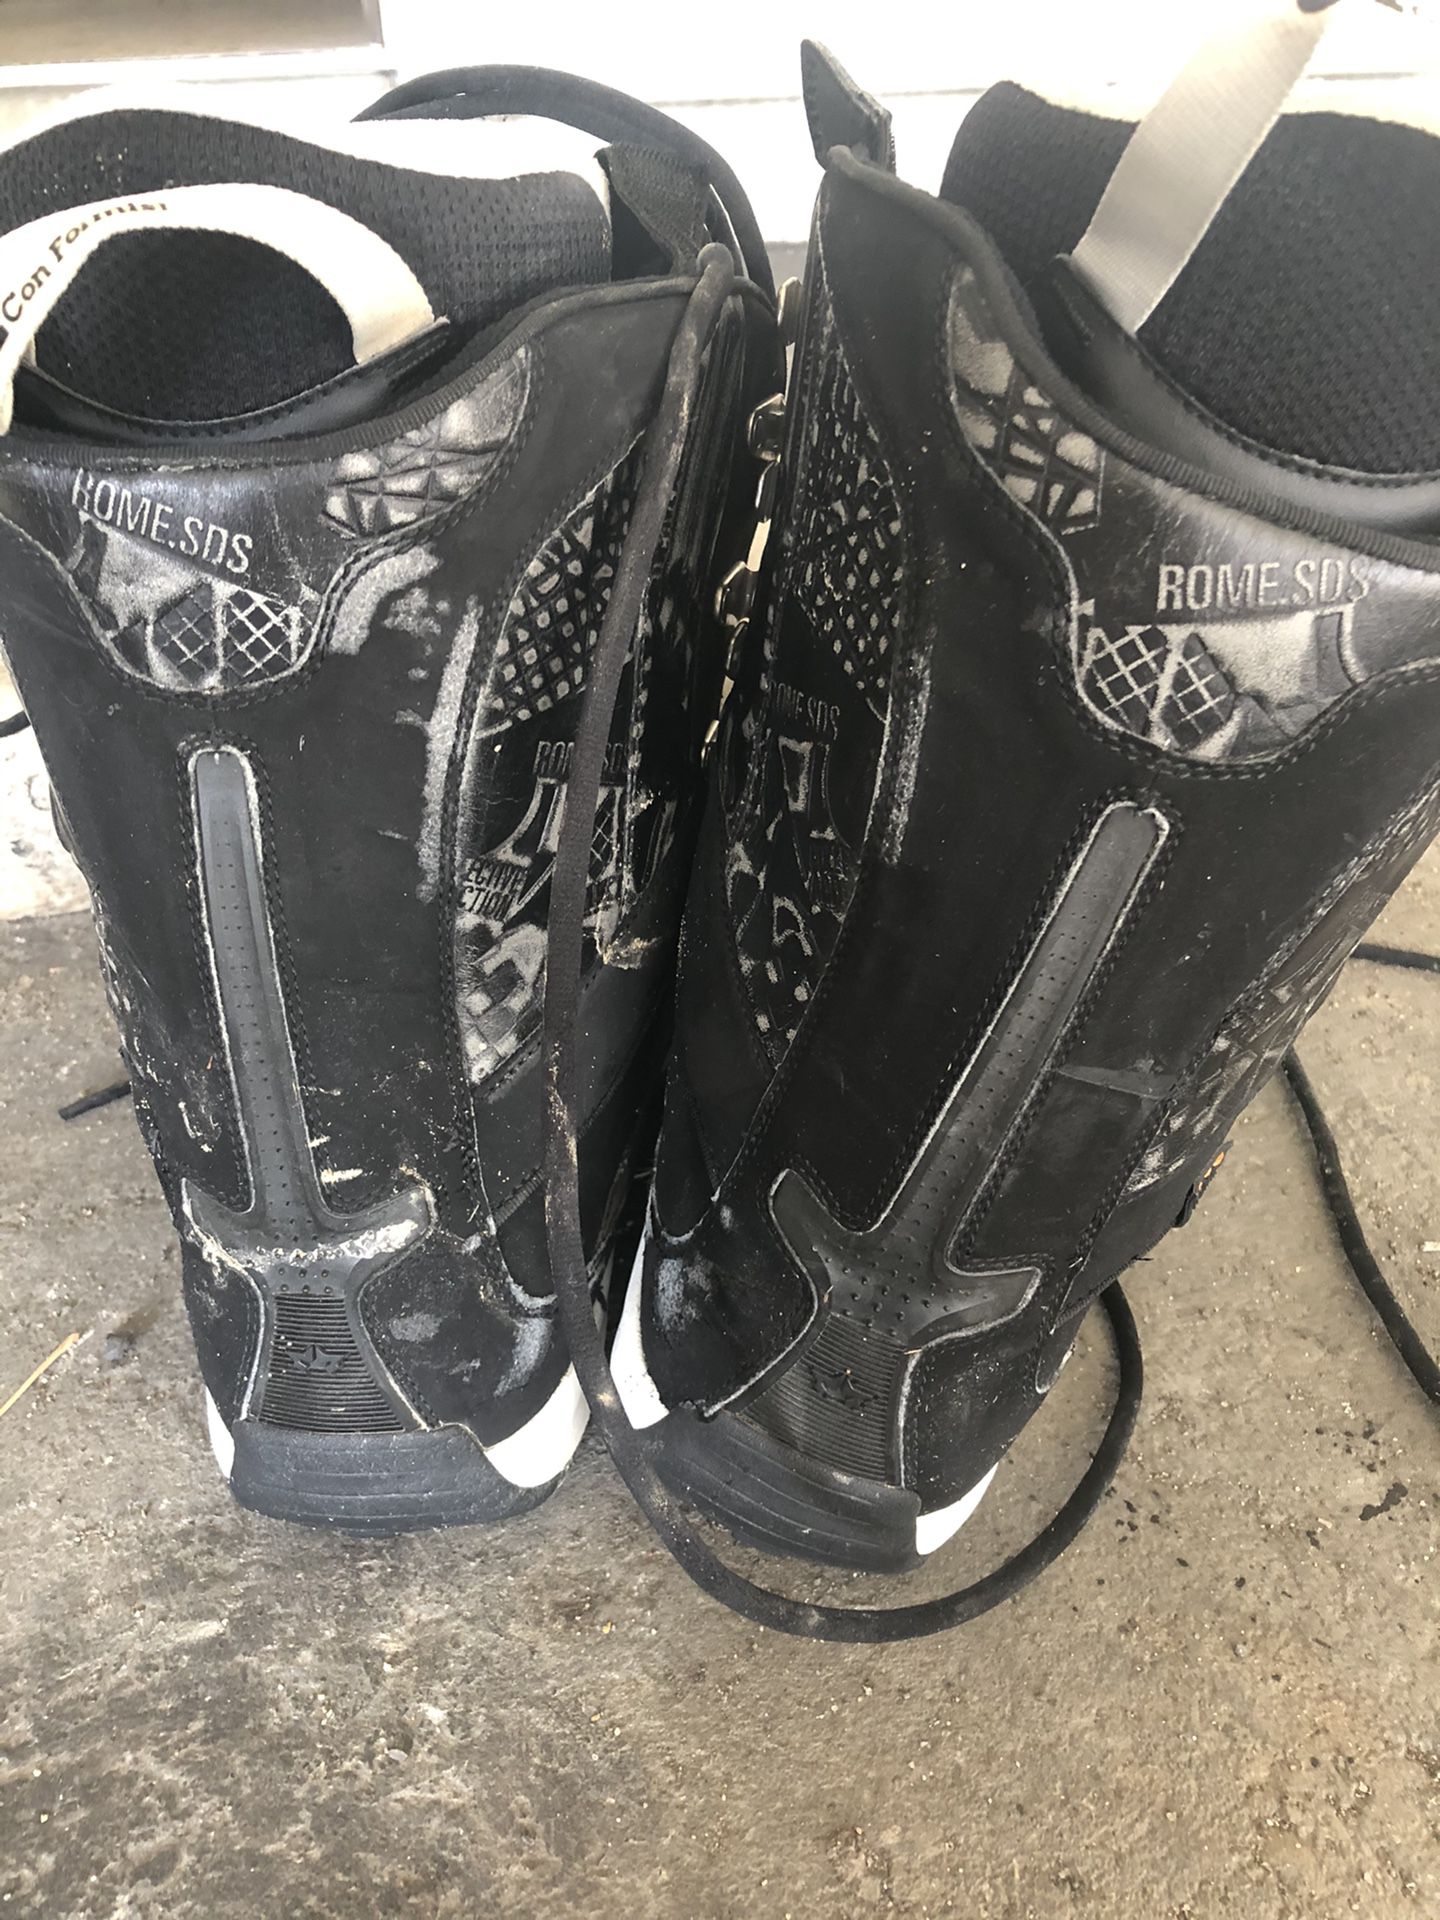 Rome SDS snowboarding boots